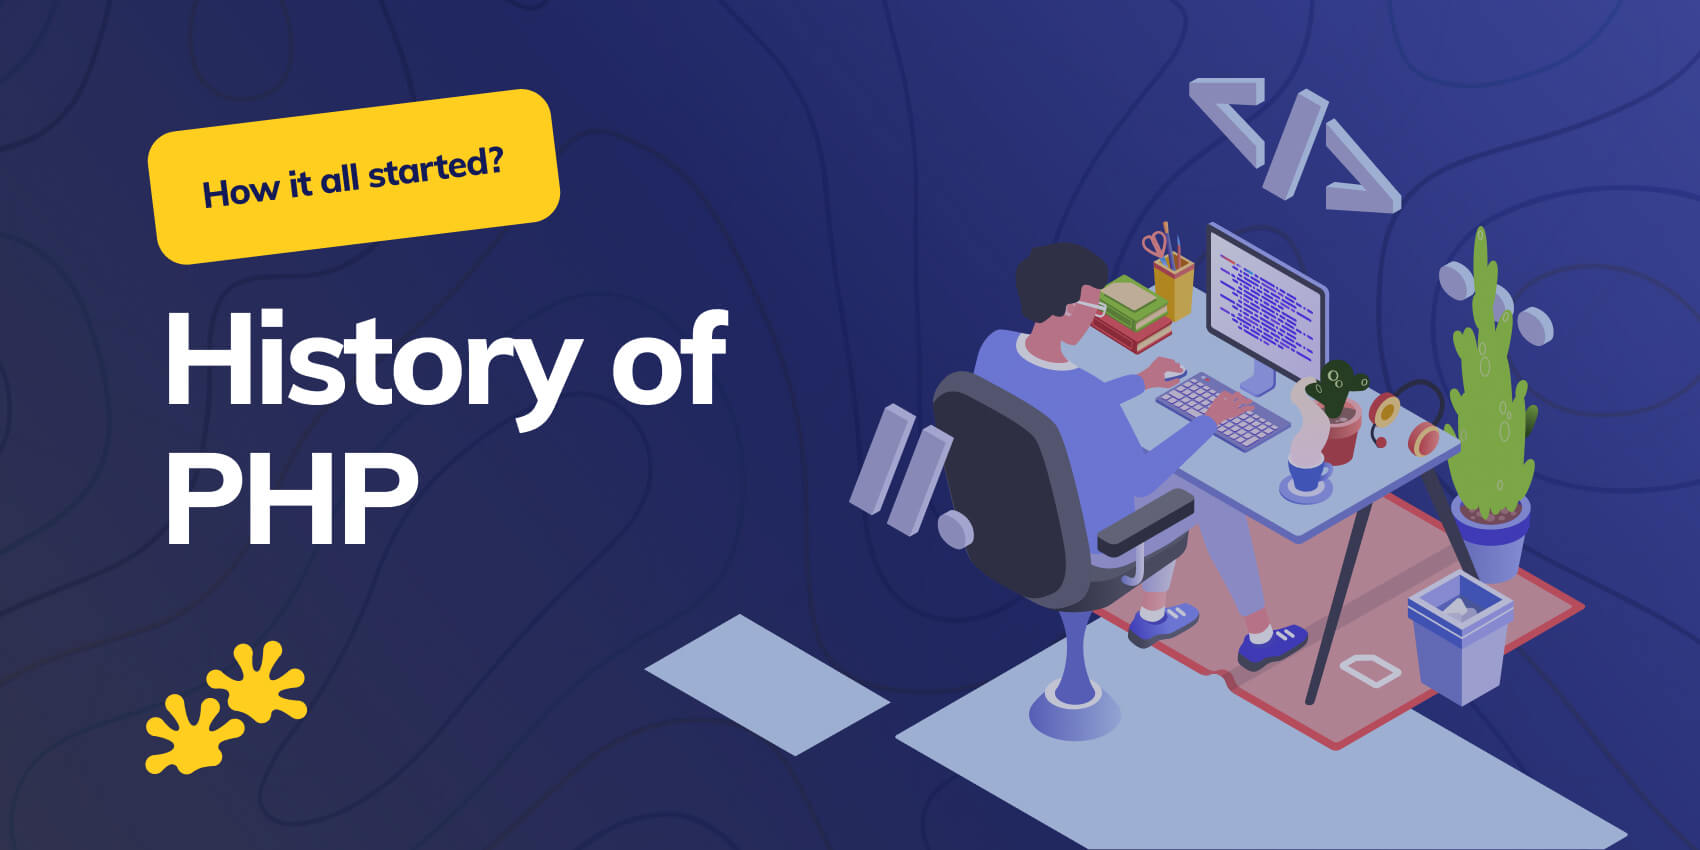 History of PHP